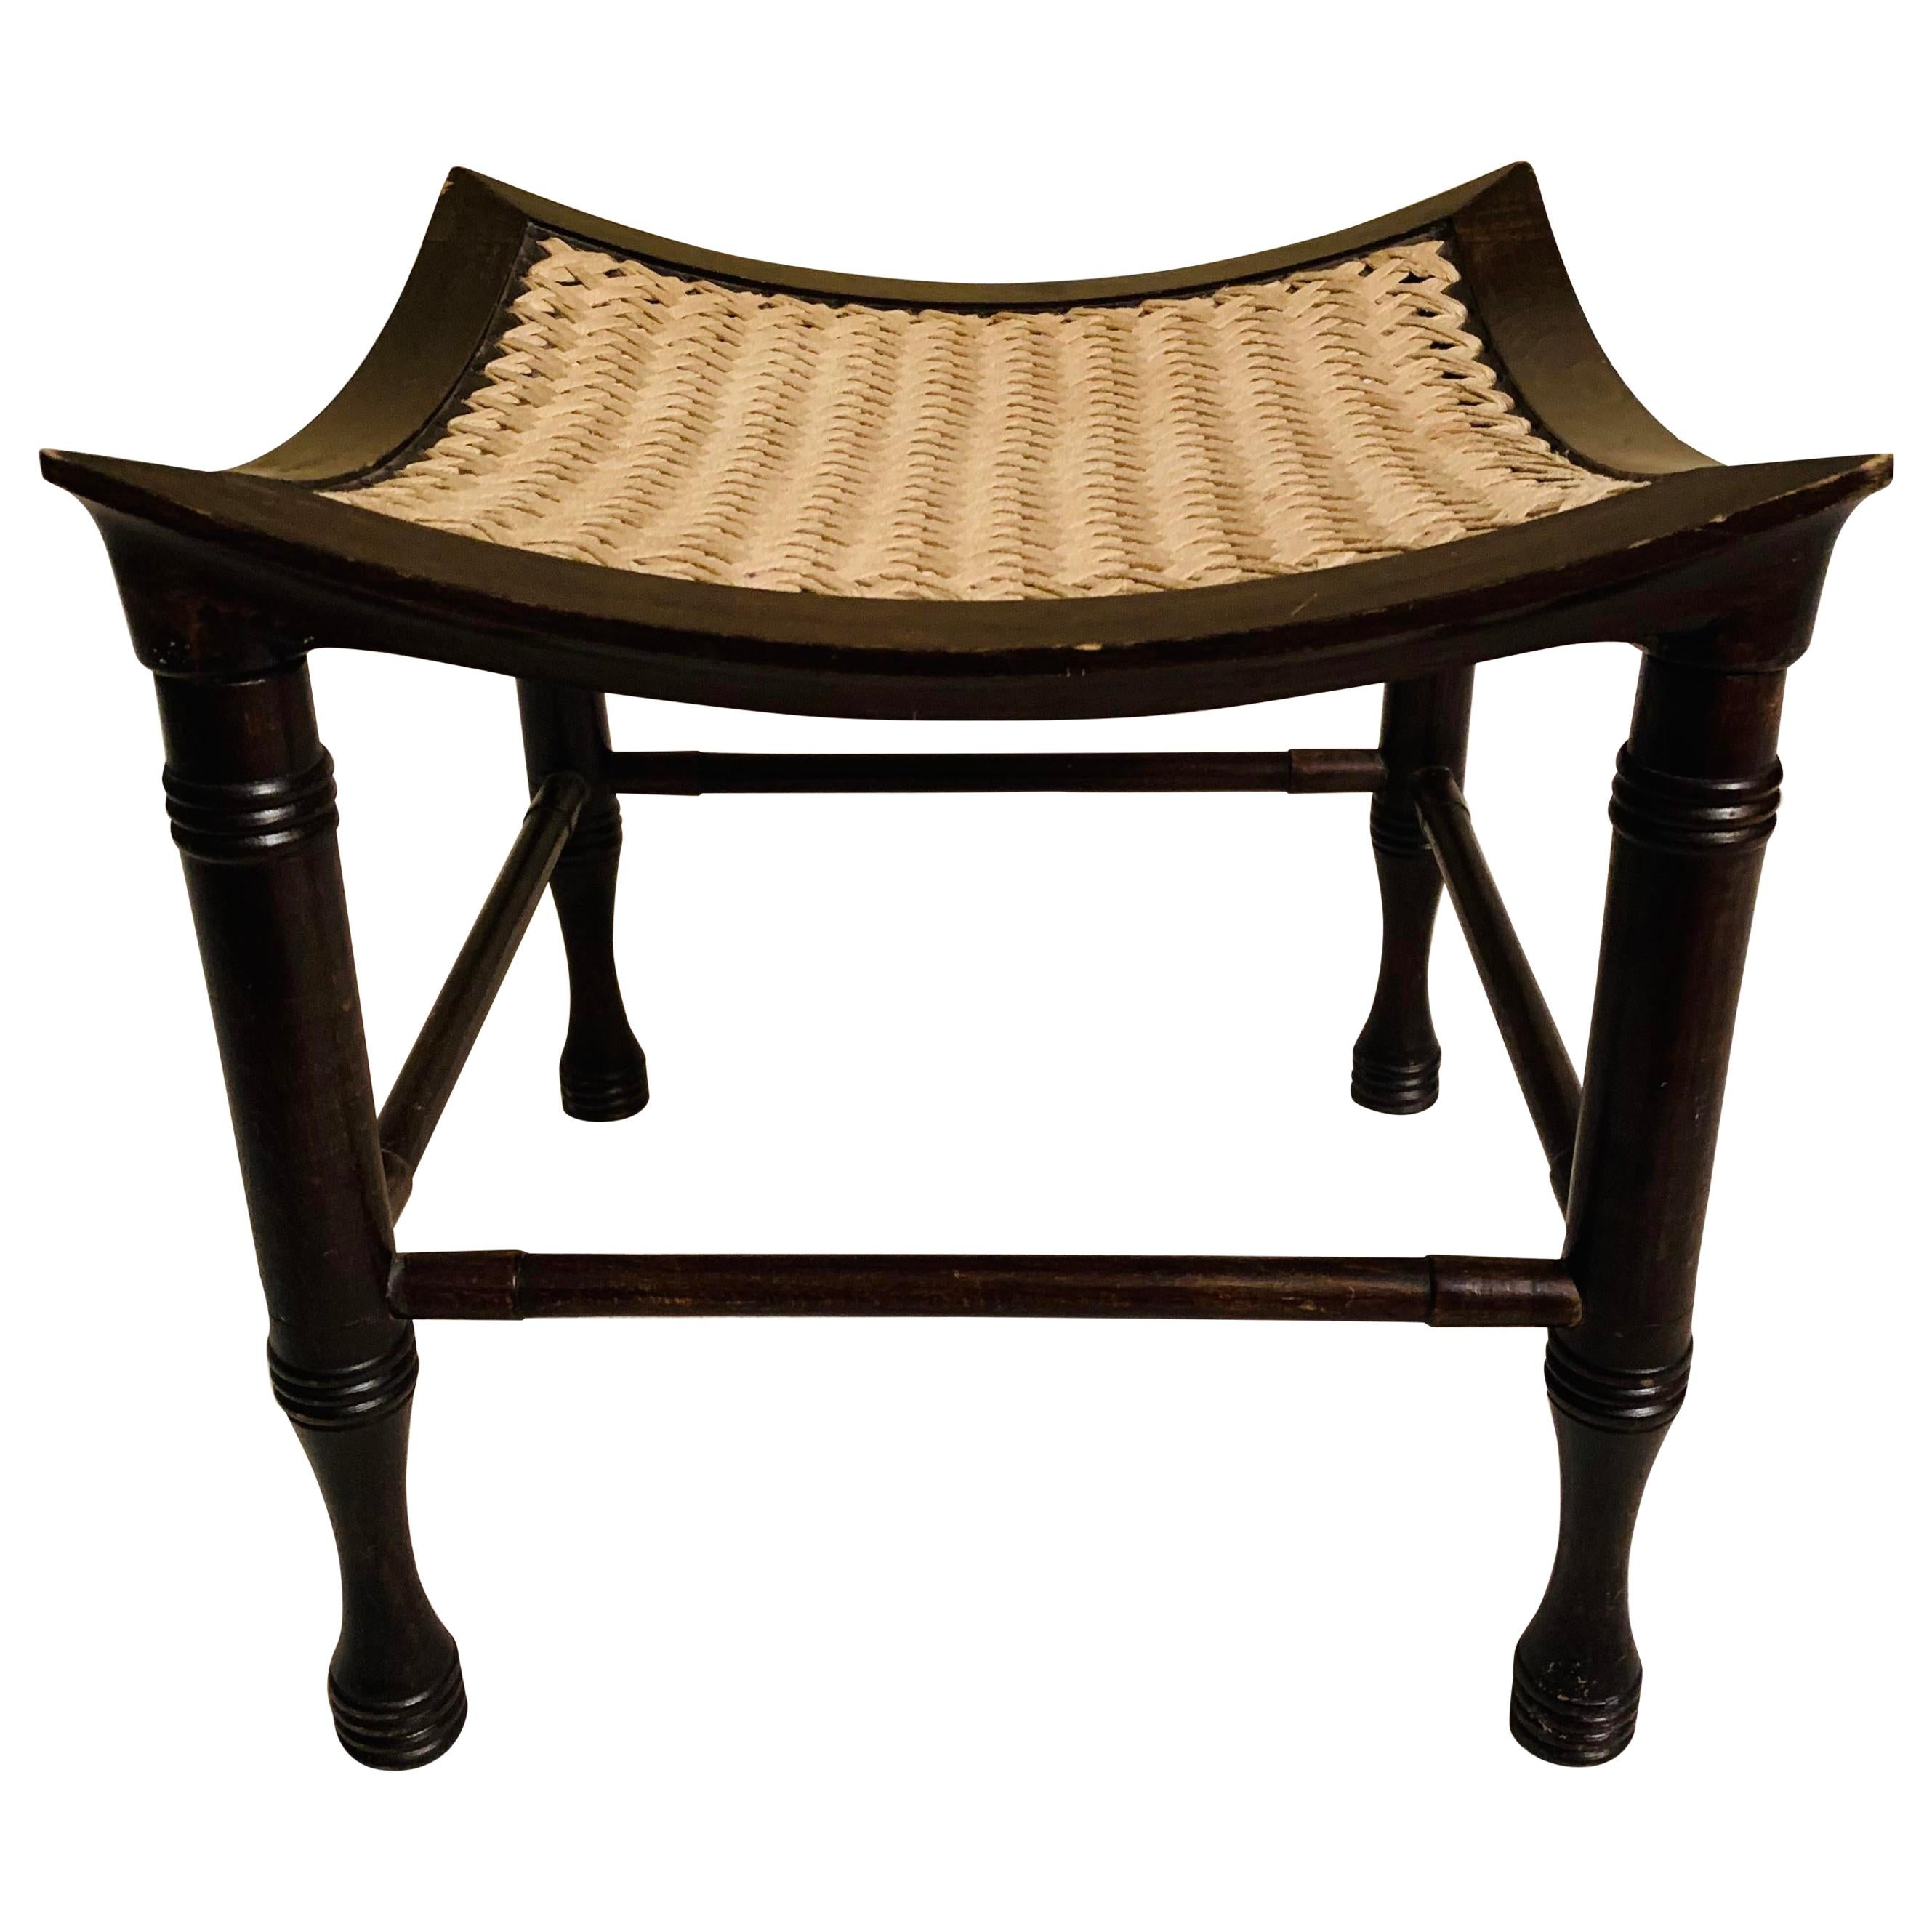 Antique Egyptian Revival Thebes Stool in the Style of Liberty & Co.